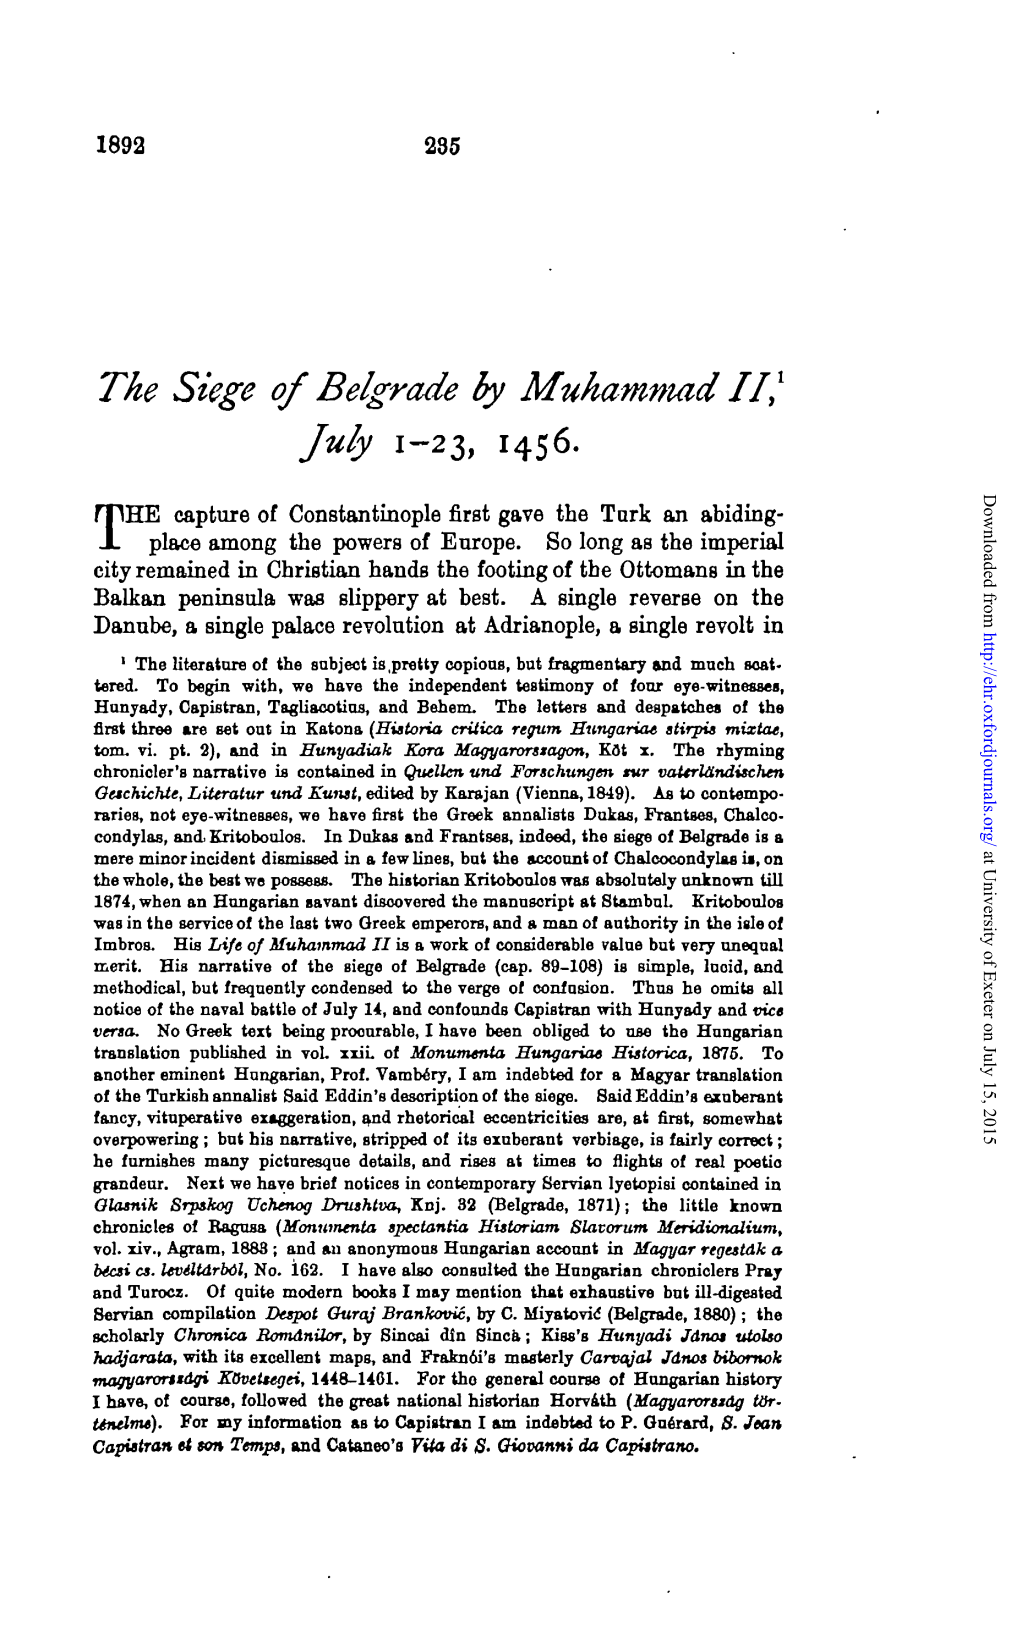 The Siege of Belgrade by Muhammad I/,1 July 1-23, 1456